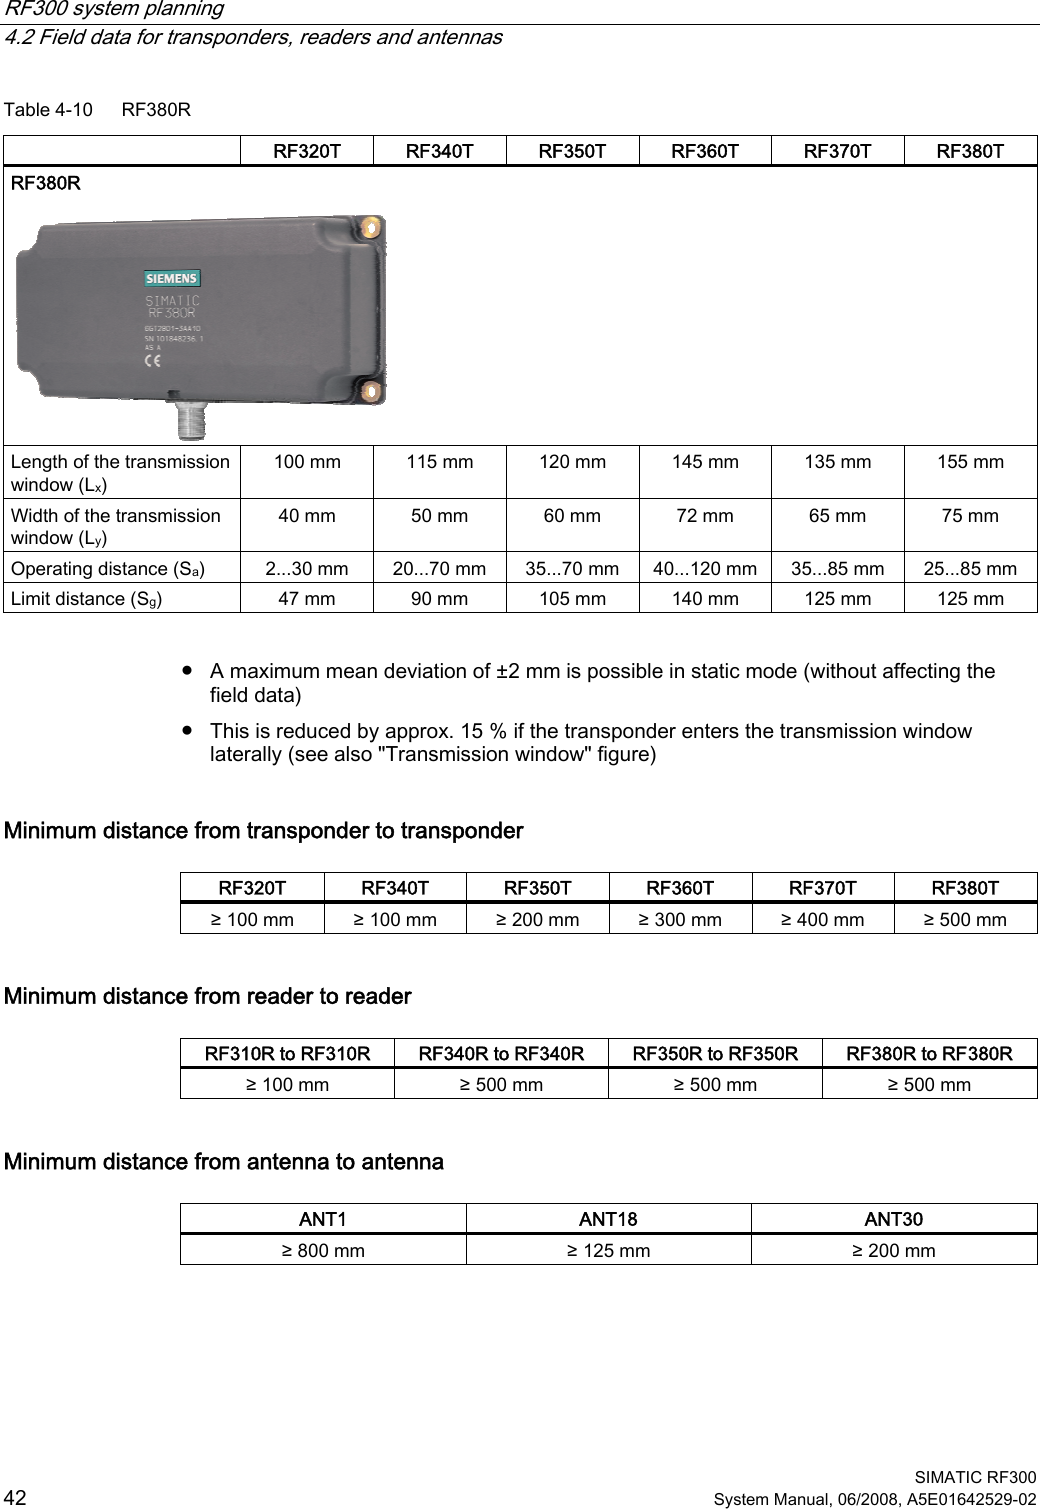 RF300 system planning   4.2 Field data for transponders, readers and antennas  SIMATIC RF300 42 System Manual, 06/2008, A5E01642529-02 Table 4-10  RF380R   RF320T  RF340T  RF350T  RF360T  RF370T  RF380T RF380R   Length of the transmission window (Lx) 100 mm  115 mm   120 mm   145 mm   135 mm   155 mm Width of the transmission window (Ly) 40 mm  50 mm  60 mm  72 mm   65 mm   75 mm Operating distance (Sa)  2...30 mm  20...70 mm  35...70 mm  40...120 mm  35...85 mm  25...85 mm Limit distance (Sg)  47 mm  90 mm  105 mm  140 mm  125 mm  125 mm  ● A maximum mean deviation of ±2 mm is possible in static mode (without affecting the field data) ● This is reduced by approx. 15 % if the transponder enters the transmission window laterally (see also &quot;Transmission window&quot; figure) Minimum distance from transponder to transponder  RF320T  RF340T  RF350T  RF360T  RF370T  RF380T ≥ 100 mm  ≥ 100 mm  ≥ 200 mm  ≥ 300 mm  ≥ 400 mm  ≥ 500 mm Minimum distance from reader to reader  RF310R to RF310R  RF340R to RF340R  RF350R to RF350R  RF380R to RF380R ≥ 100 mm  ≥ 500 mm  ≥ 500 mm  ≥ 500 mm Minimum distance from antenna to antenna  ANT1  ANT18  ANT30 ≥ 800 mm  ≥ 125 mm  ≥ 200 mm  